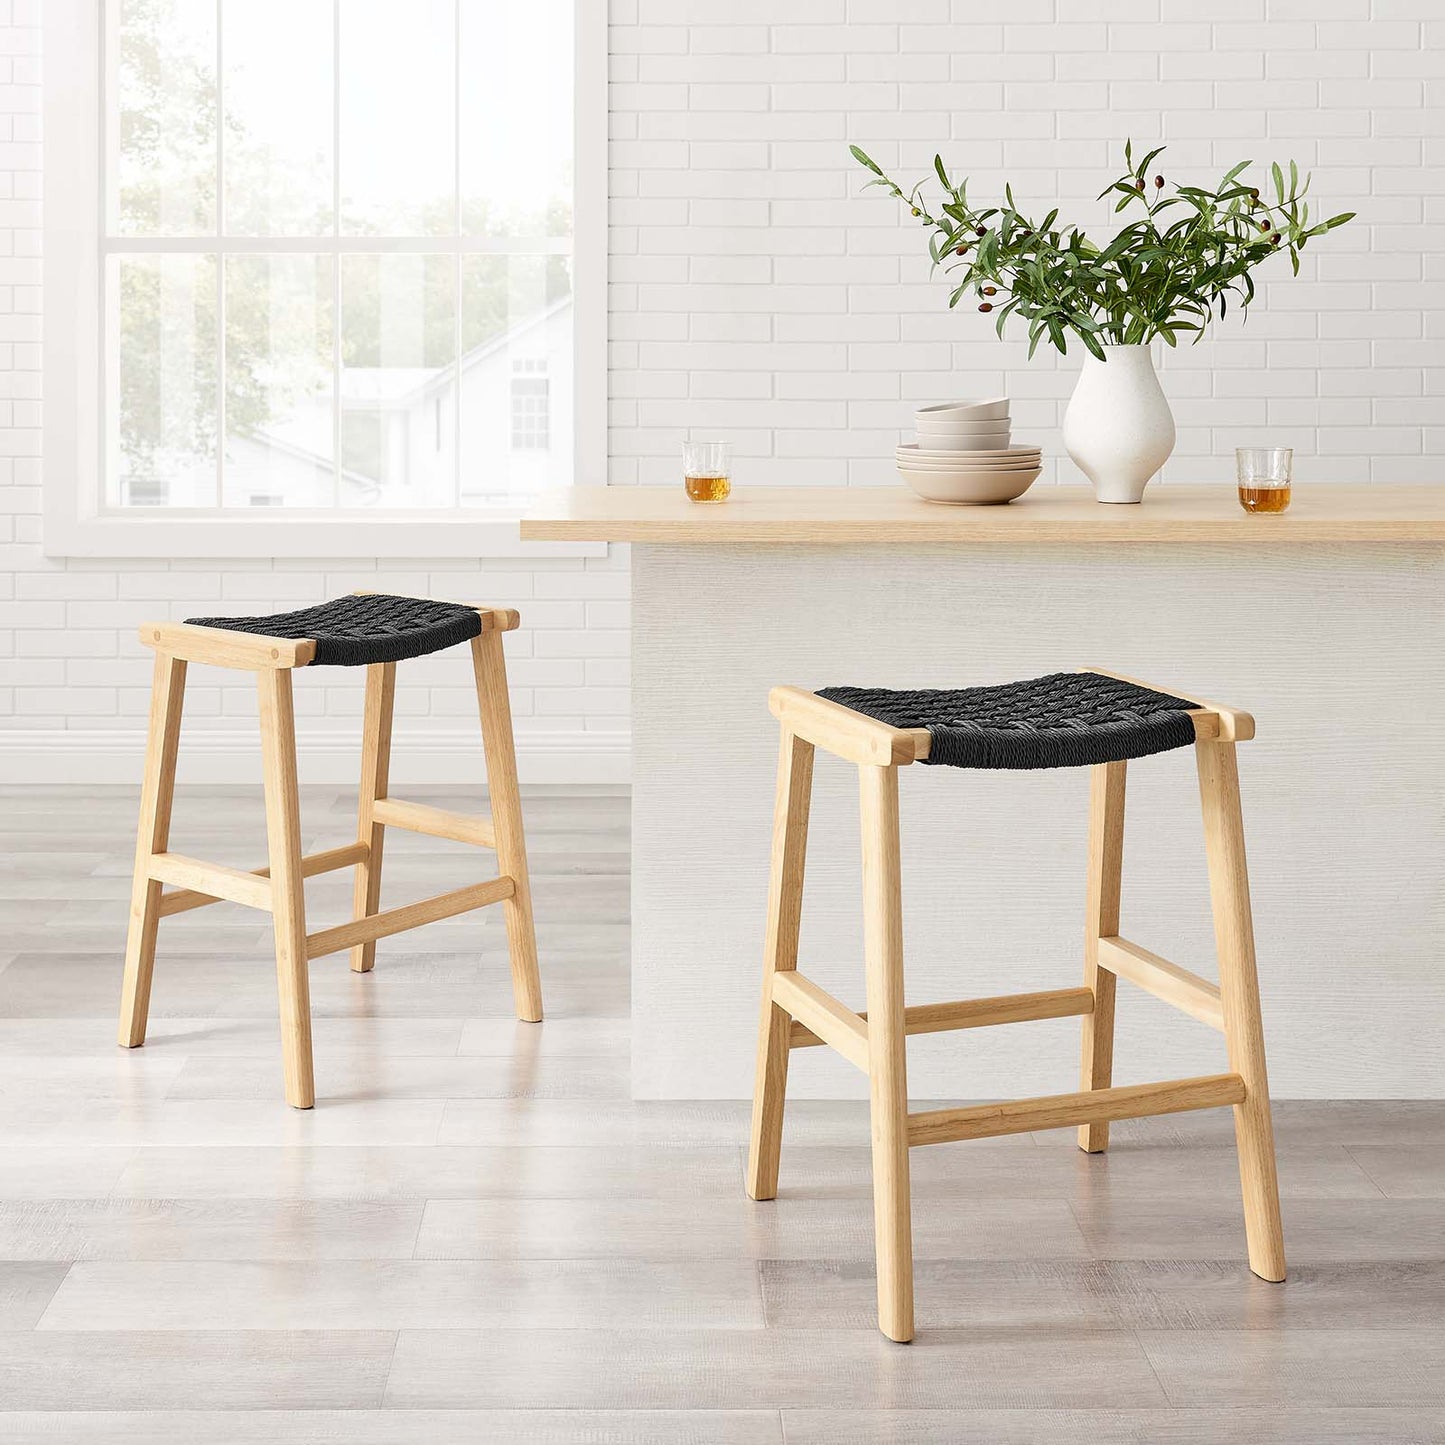 Saoirse Woven Rope Wood Counter Stool - Set of 2 By Modway - EEI-6548 | Counter Stools | Modway - 7